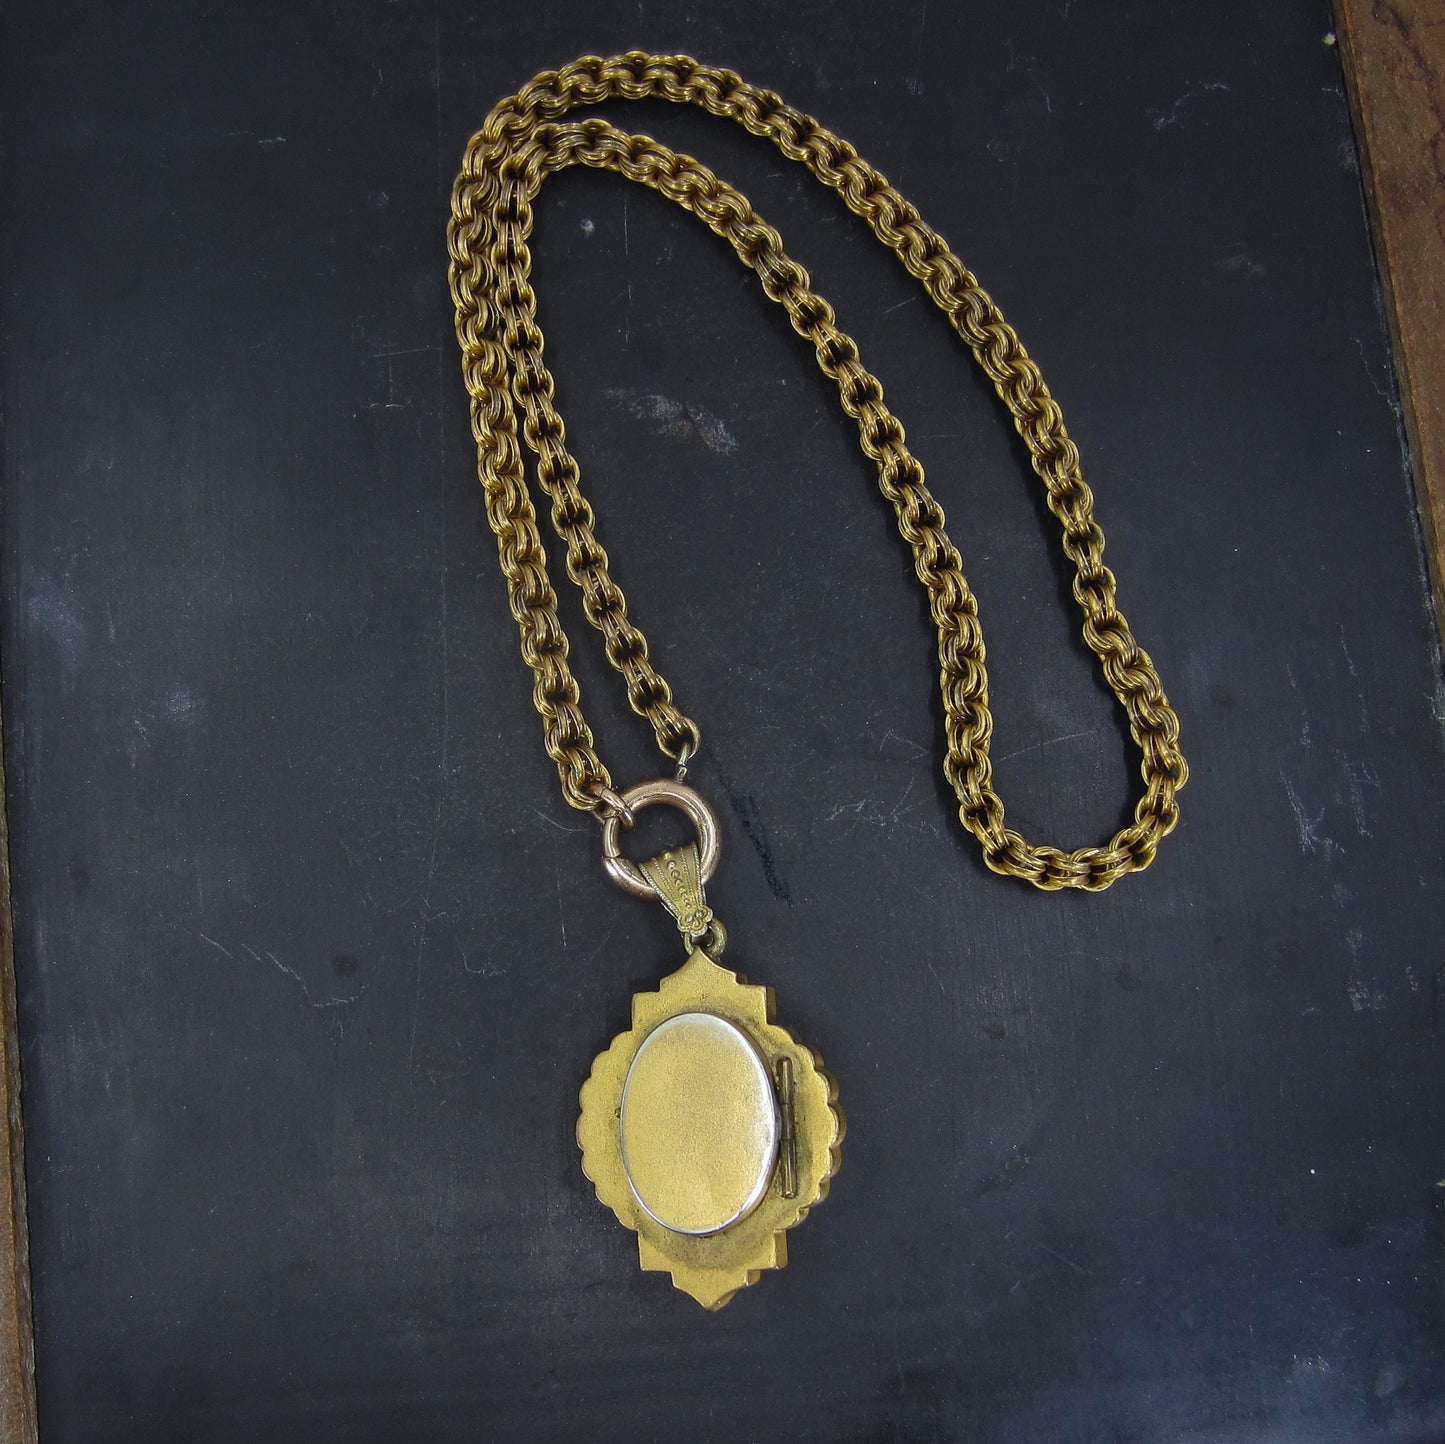 SOLD-Victorian Etruscan Revival Locket and Chain Gold-Filled c. 1880